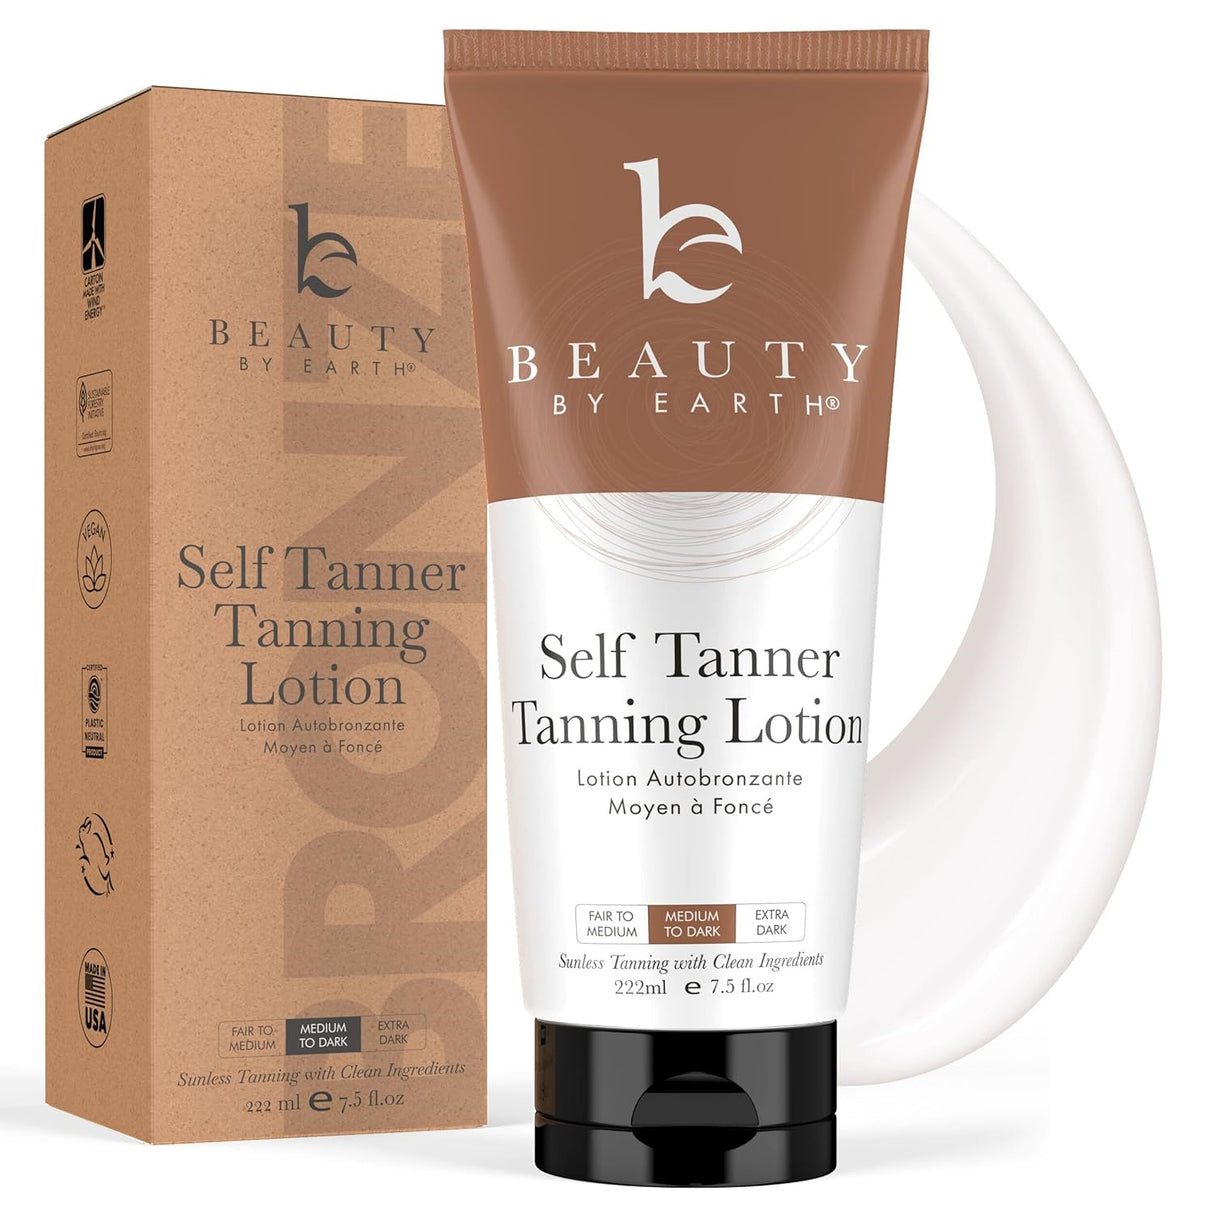 Beauty by Earth Large 7.5 oz Self Tanner Tanning Lotion - Medium to Dark 